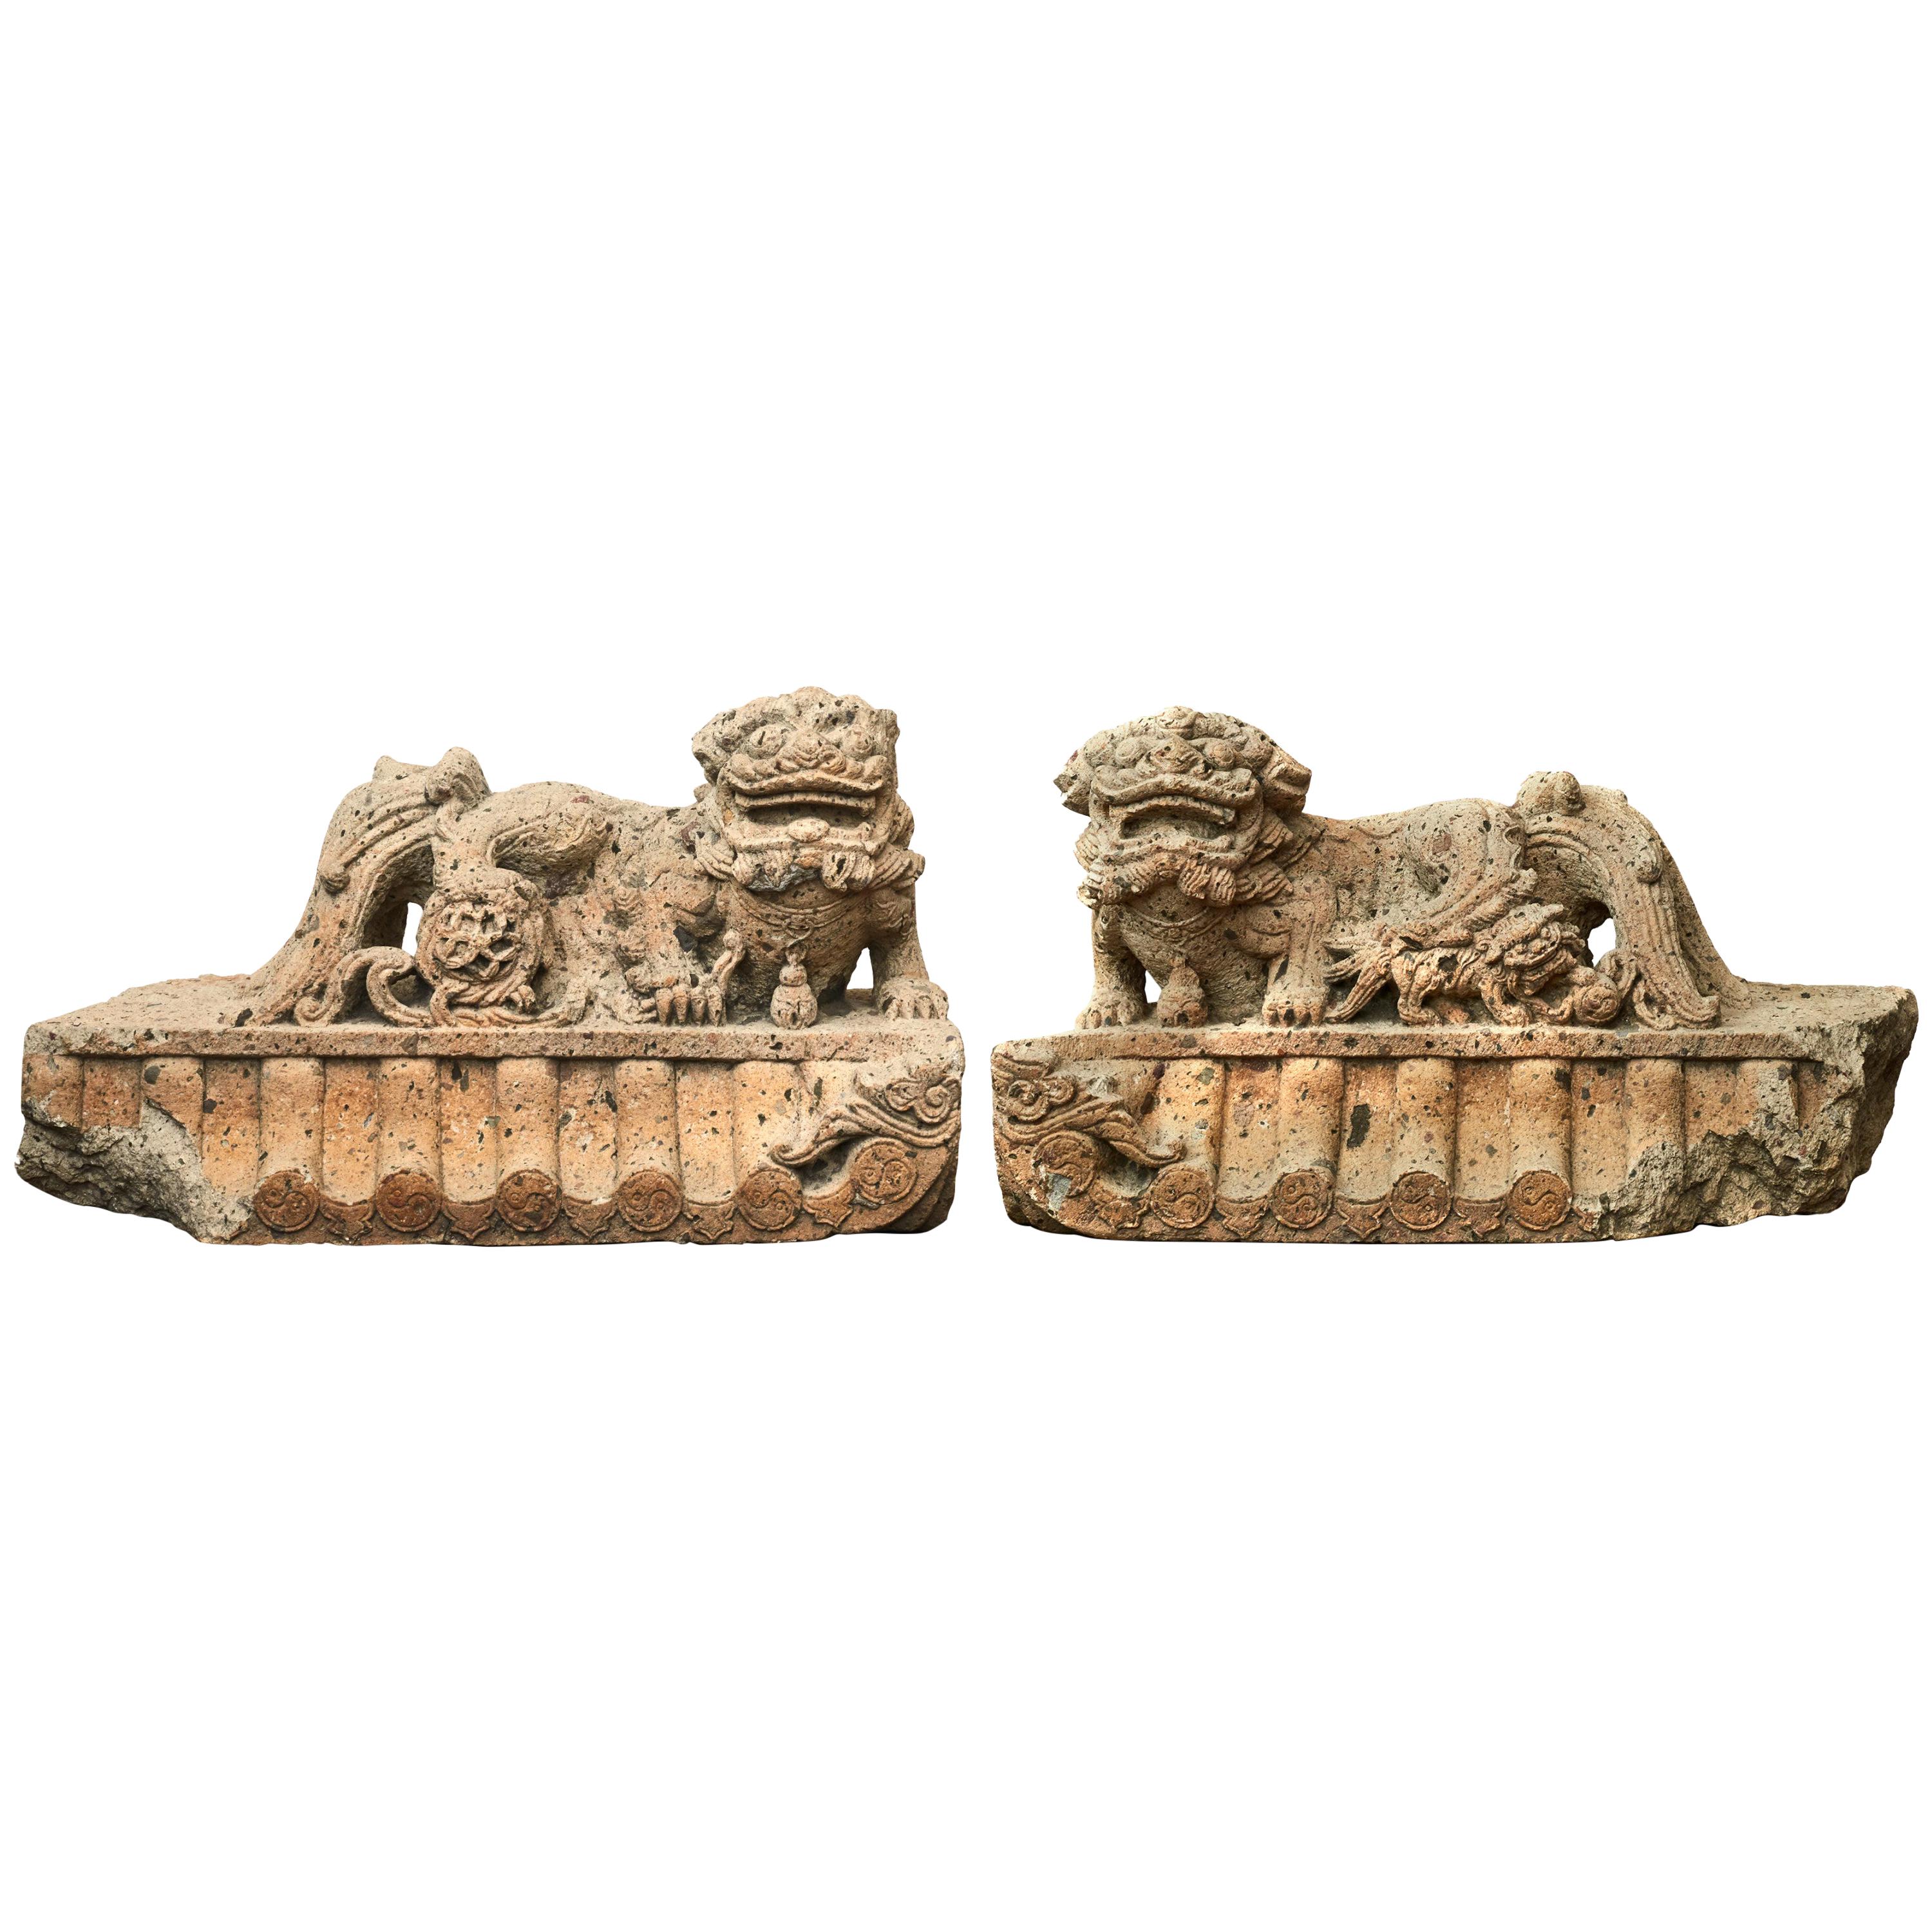 Pair of Chinese 16th-17th Century Carved Stone Guardian Lion Sculptures